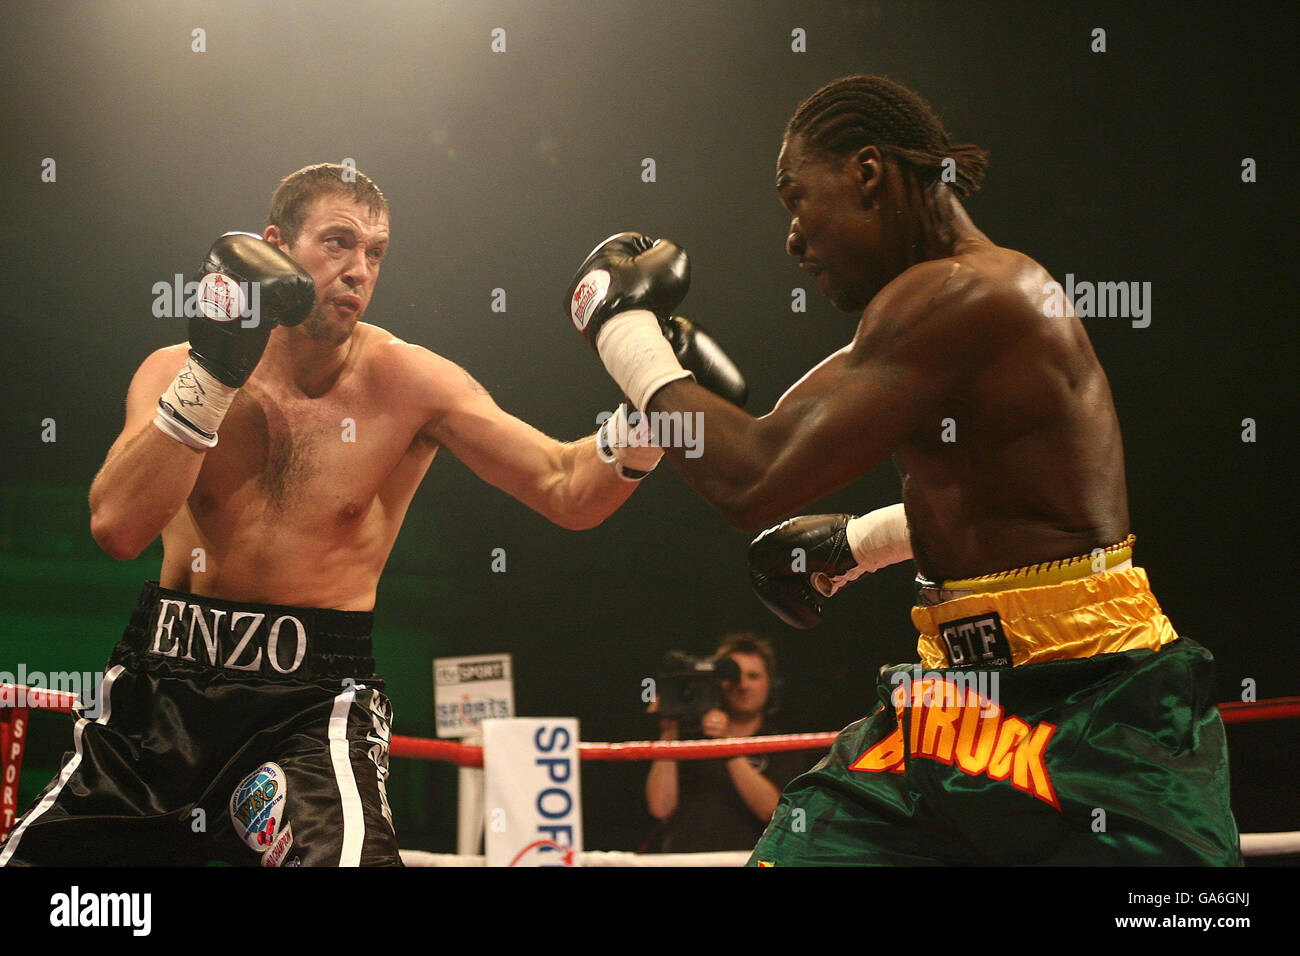 Wales' Enzo Maccarinelli (left) and Guyana's Wayne Braithwaite in action during the WBO Cruiserweight bout at The International Arena, Cardiff. Stock Photo